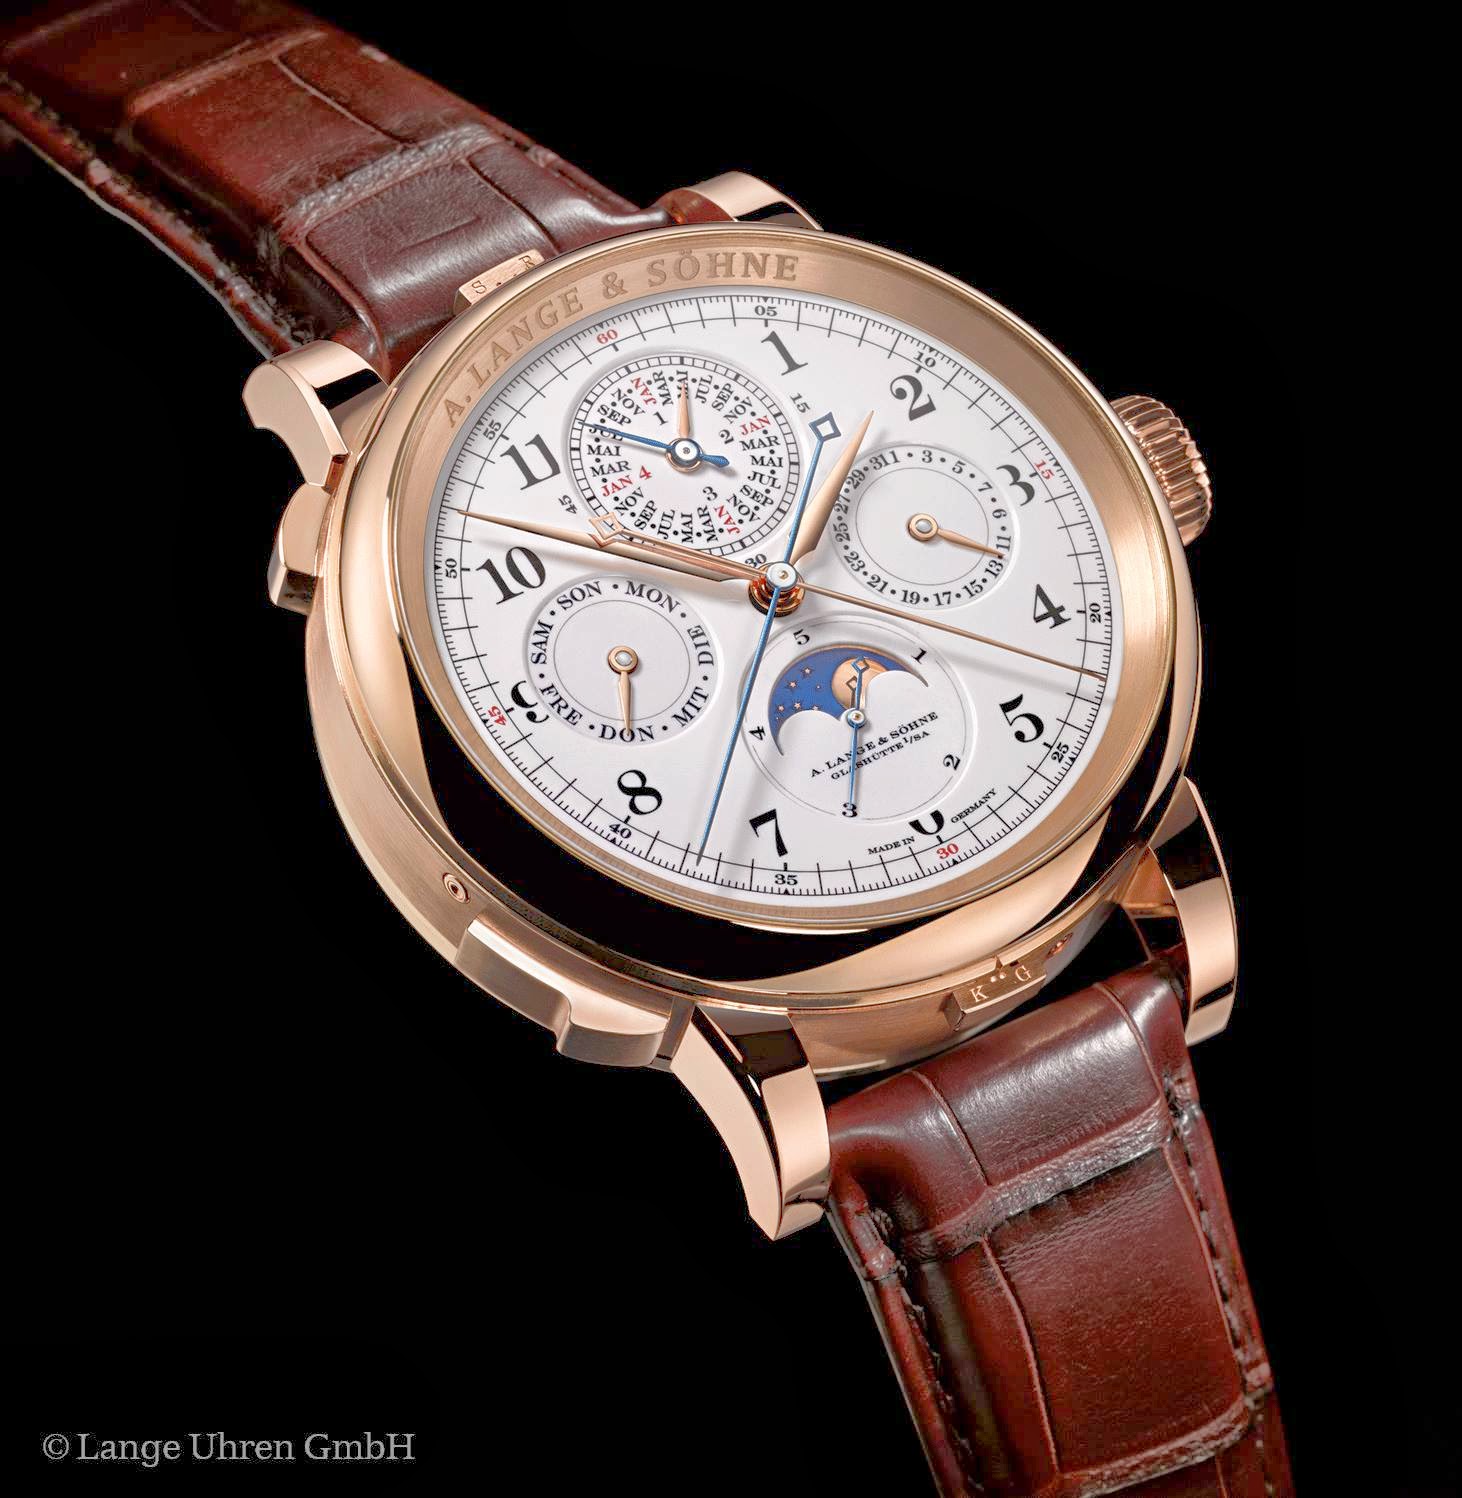 Height of Horology: A. Lange & Söhne - Grand Complication